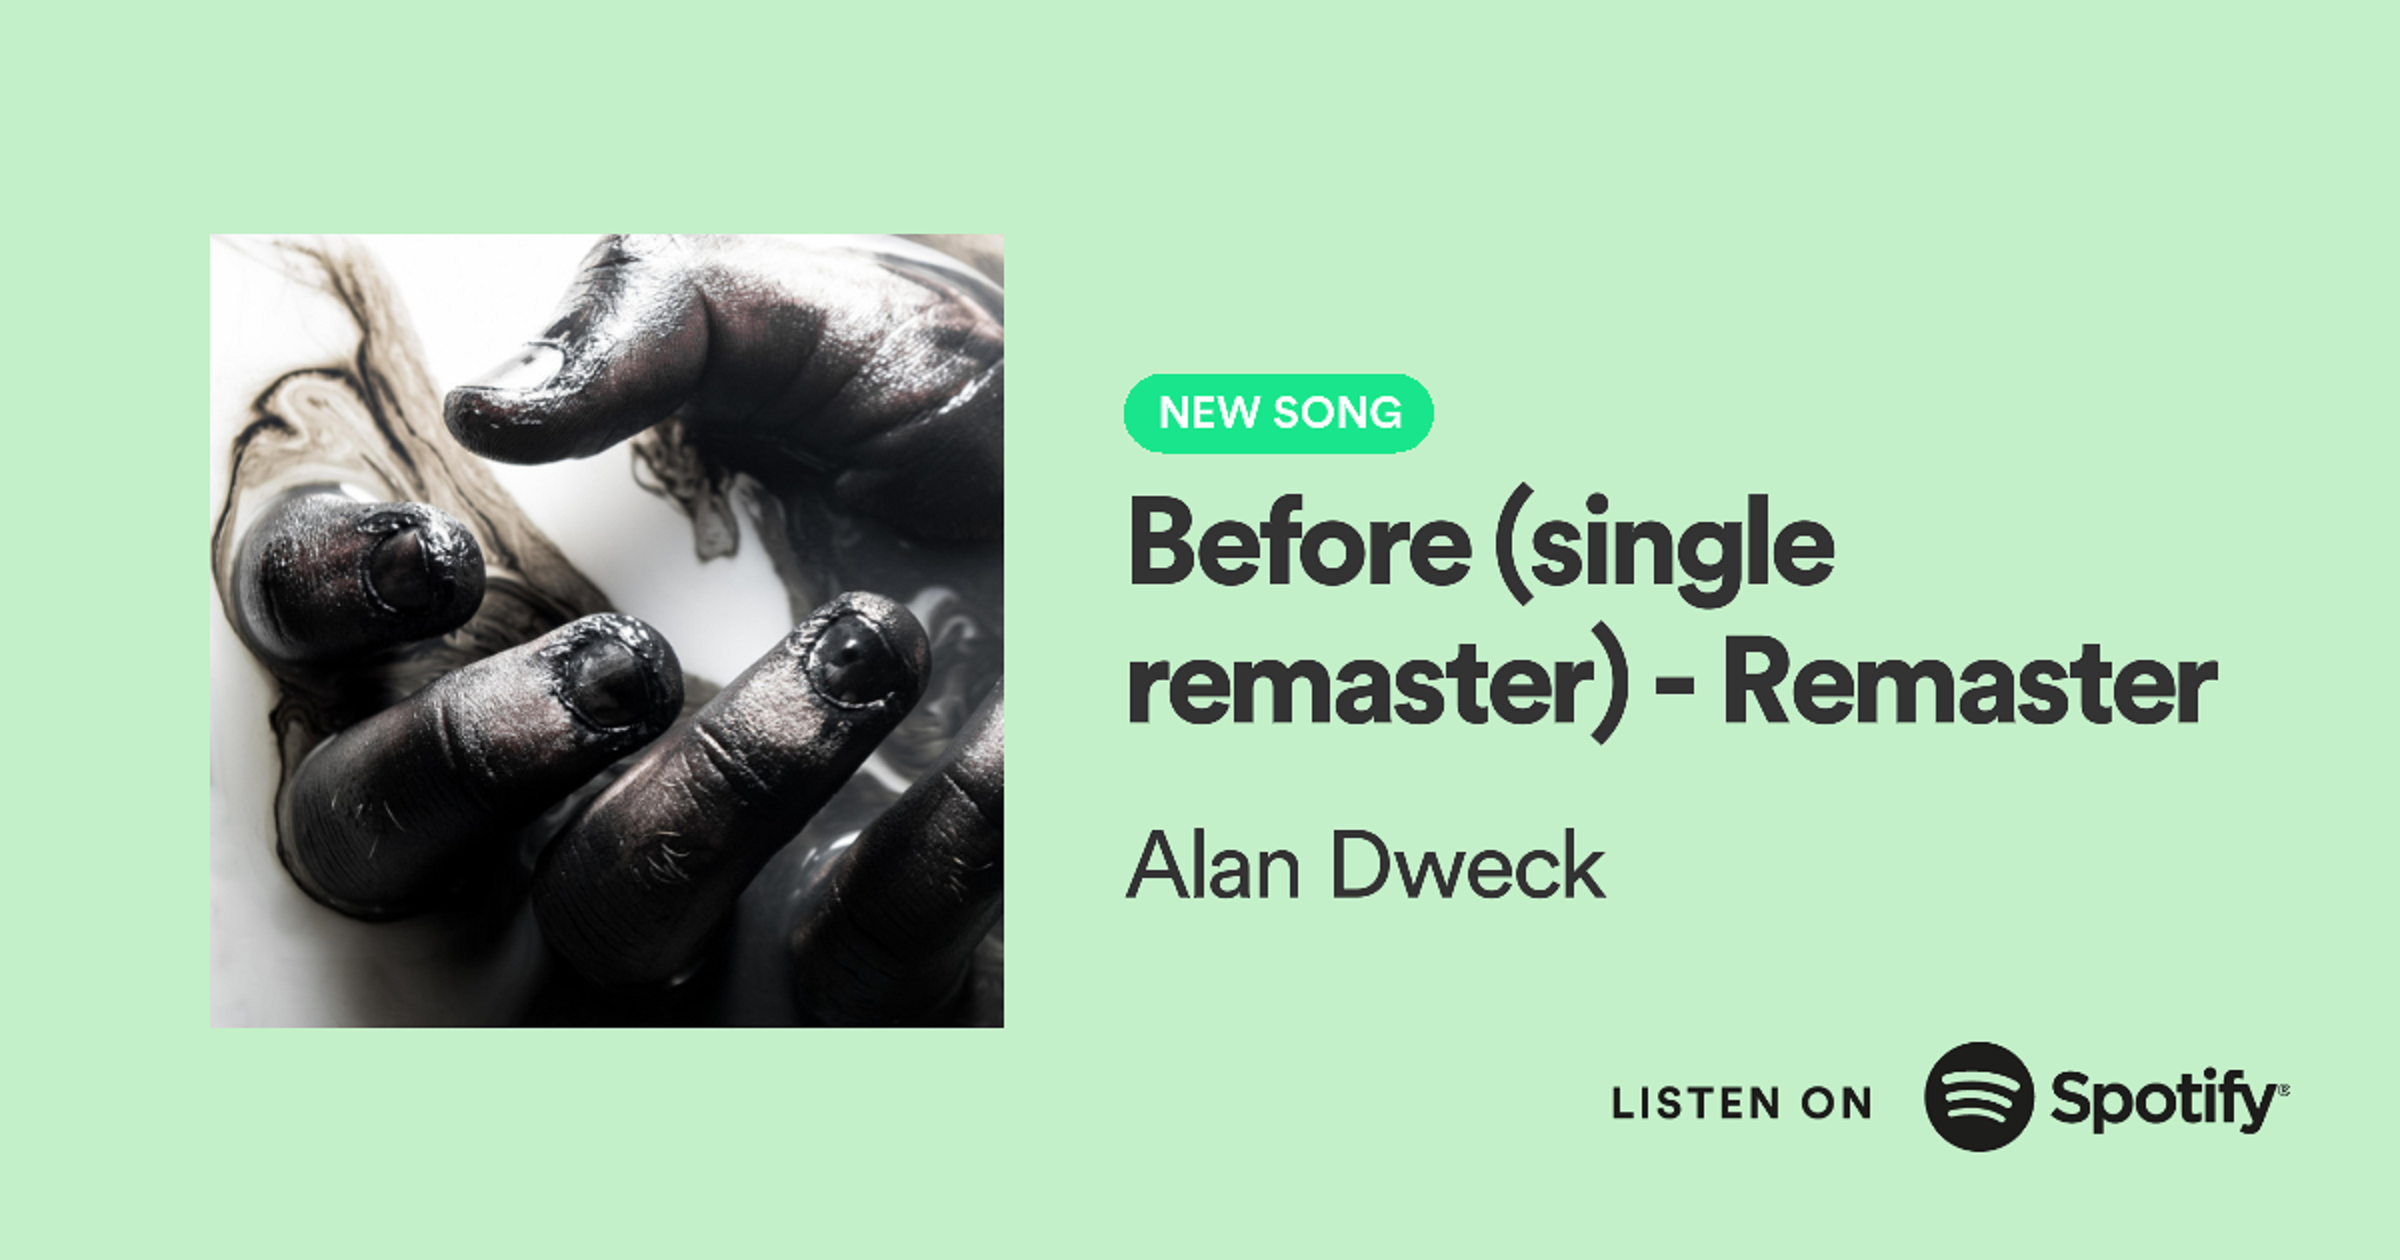 Alan Dweck paints visceral imagery with new single 'Before'